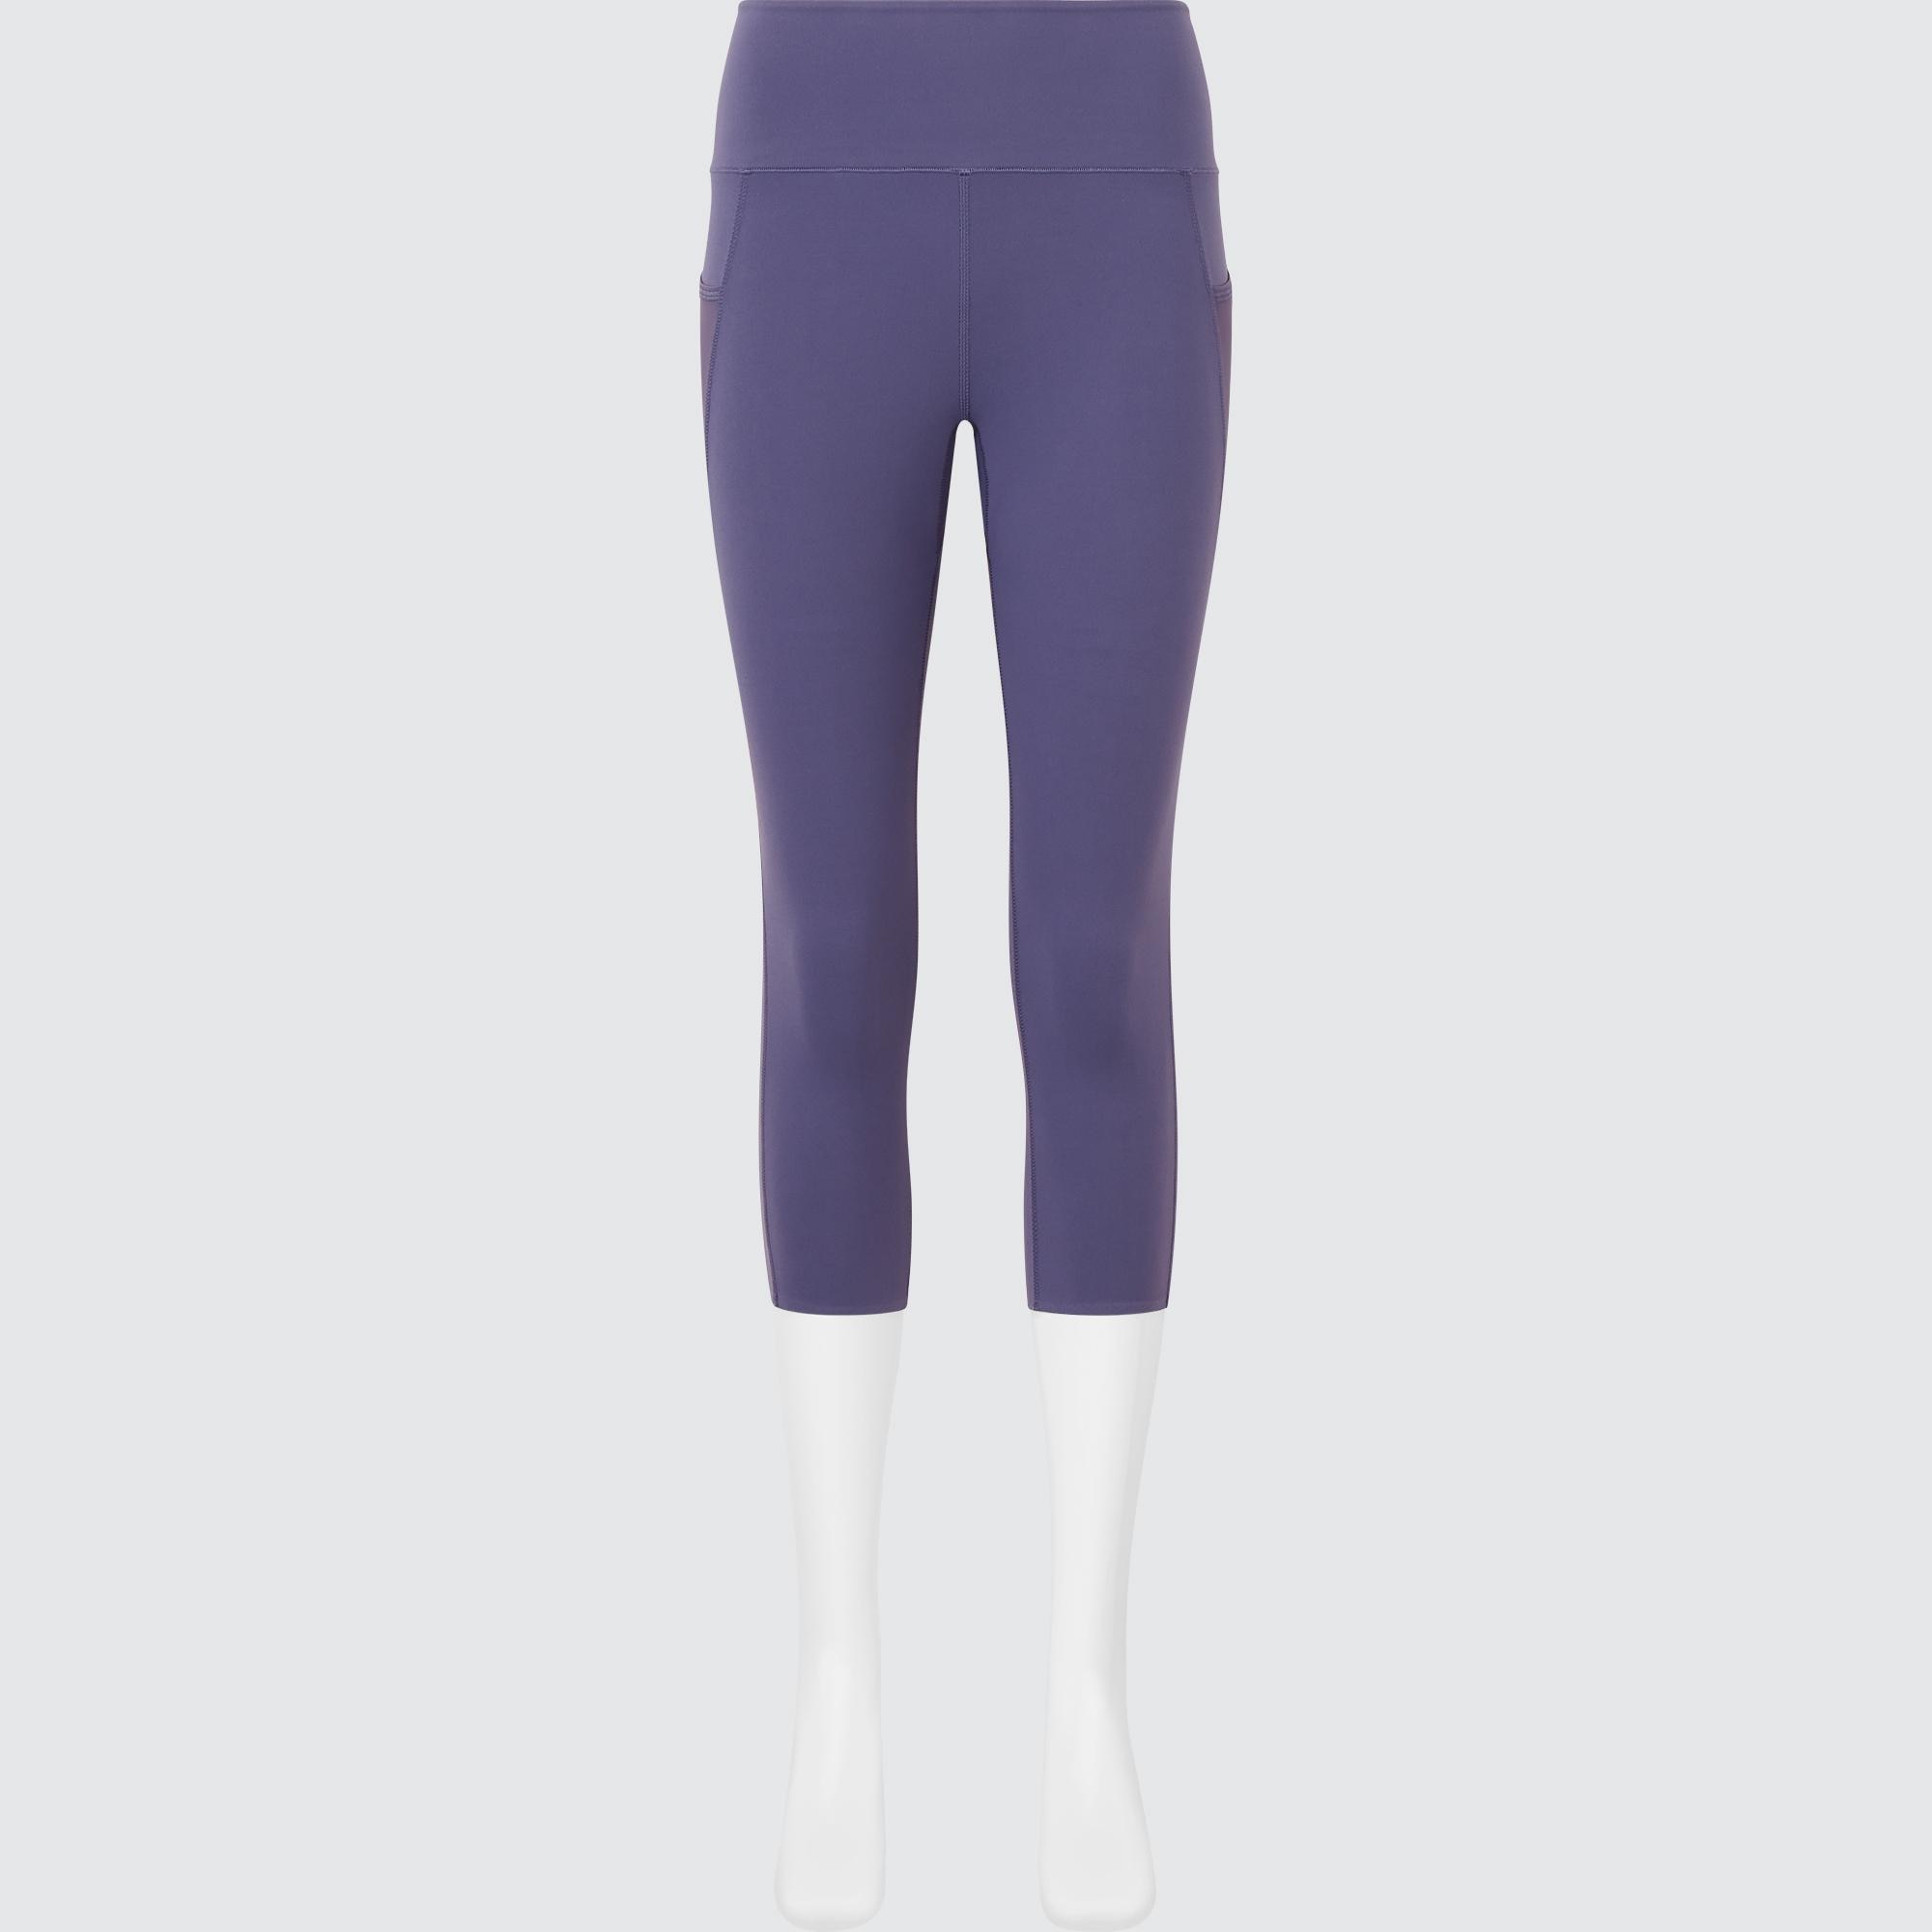 Women's UNIQLO US Airism Uv Protection Pocketed Soft Leggings with